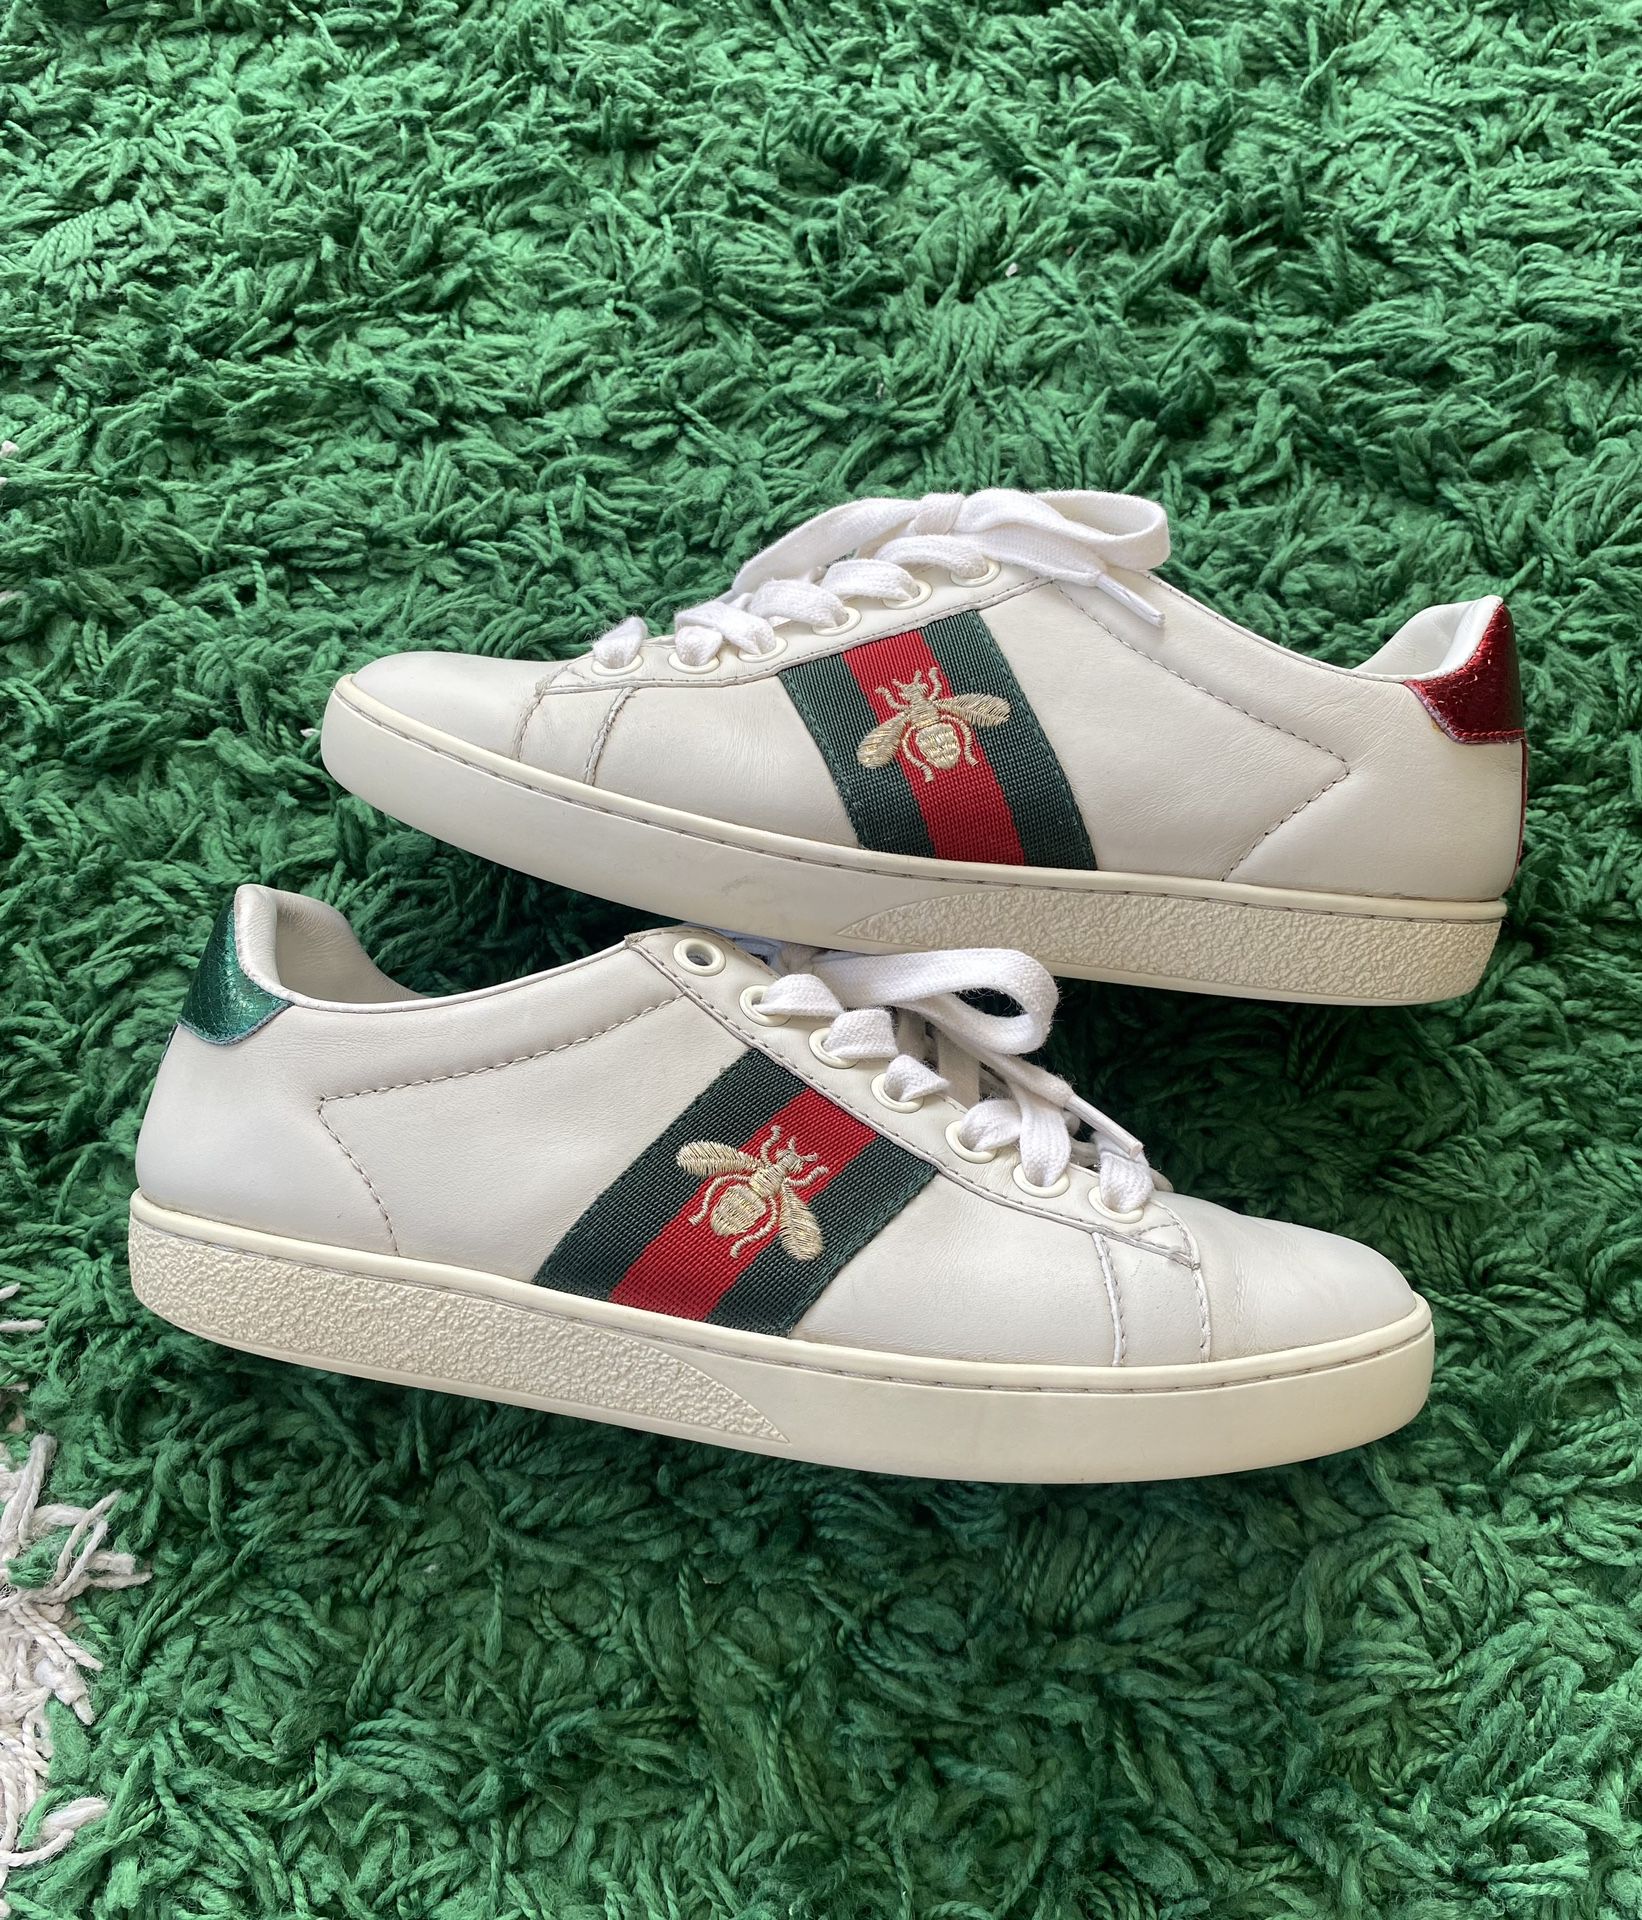 Gucci Ace Embroidered Bee Womens Shoe Sneakers W Size 6W/4.5M/4.5Y/36 EU Pre-Owned/Used! No Box! GOOD CONDITION!